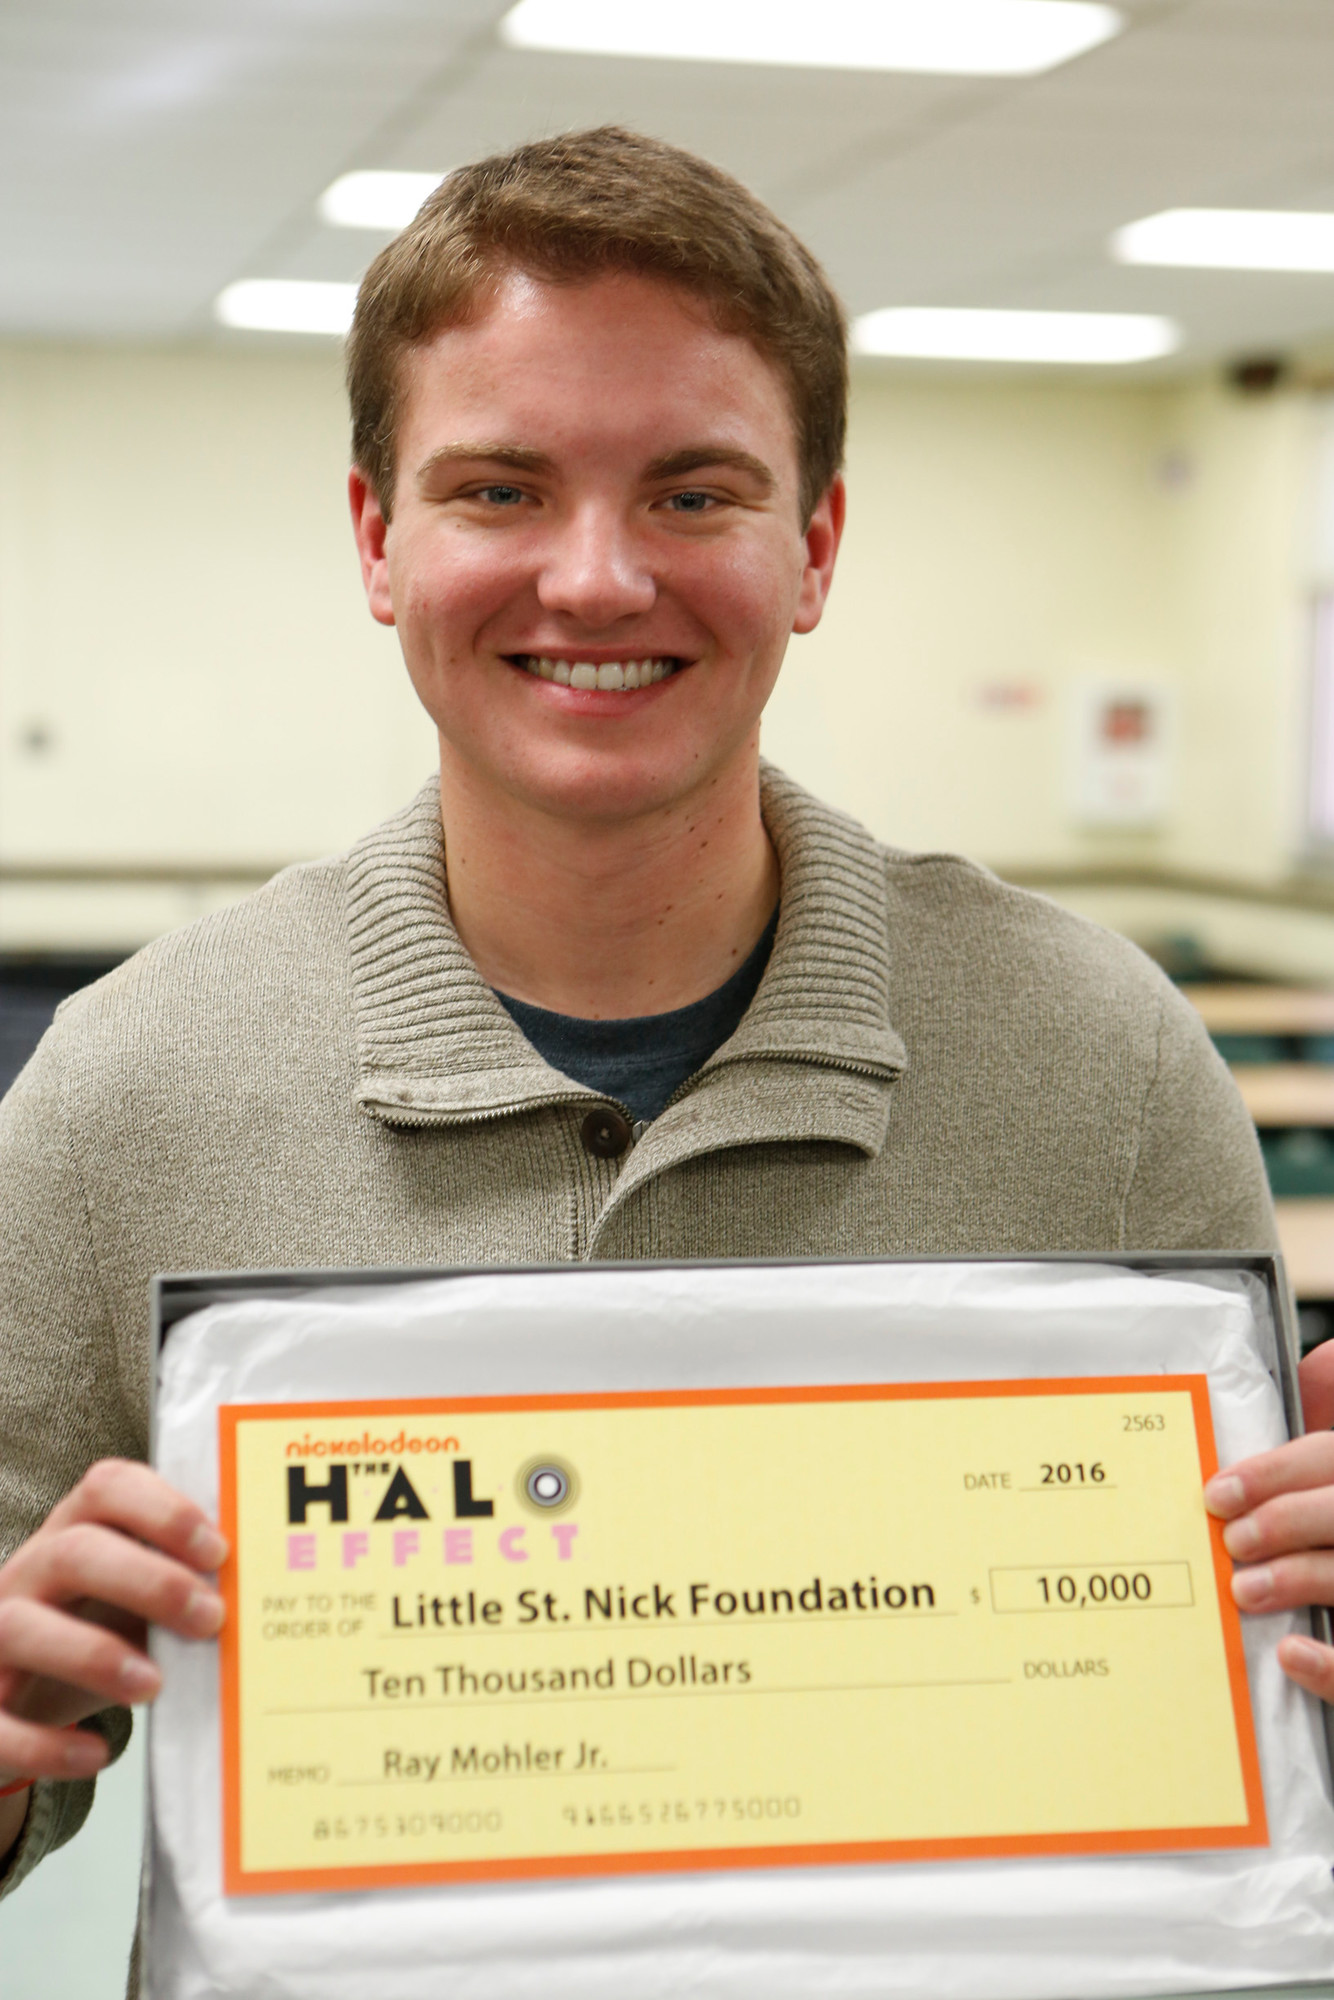 The host of Nickelodeon’s ‘The Halo Effect’
surprised Ray Mohler Jr. with a check for $10,000 for the Little Saint Nick organization.